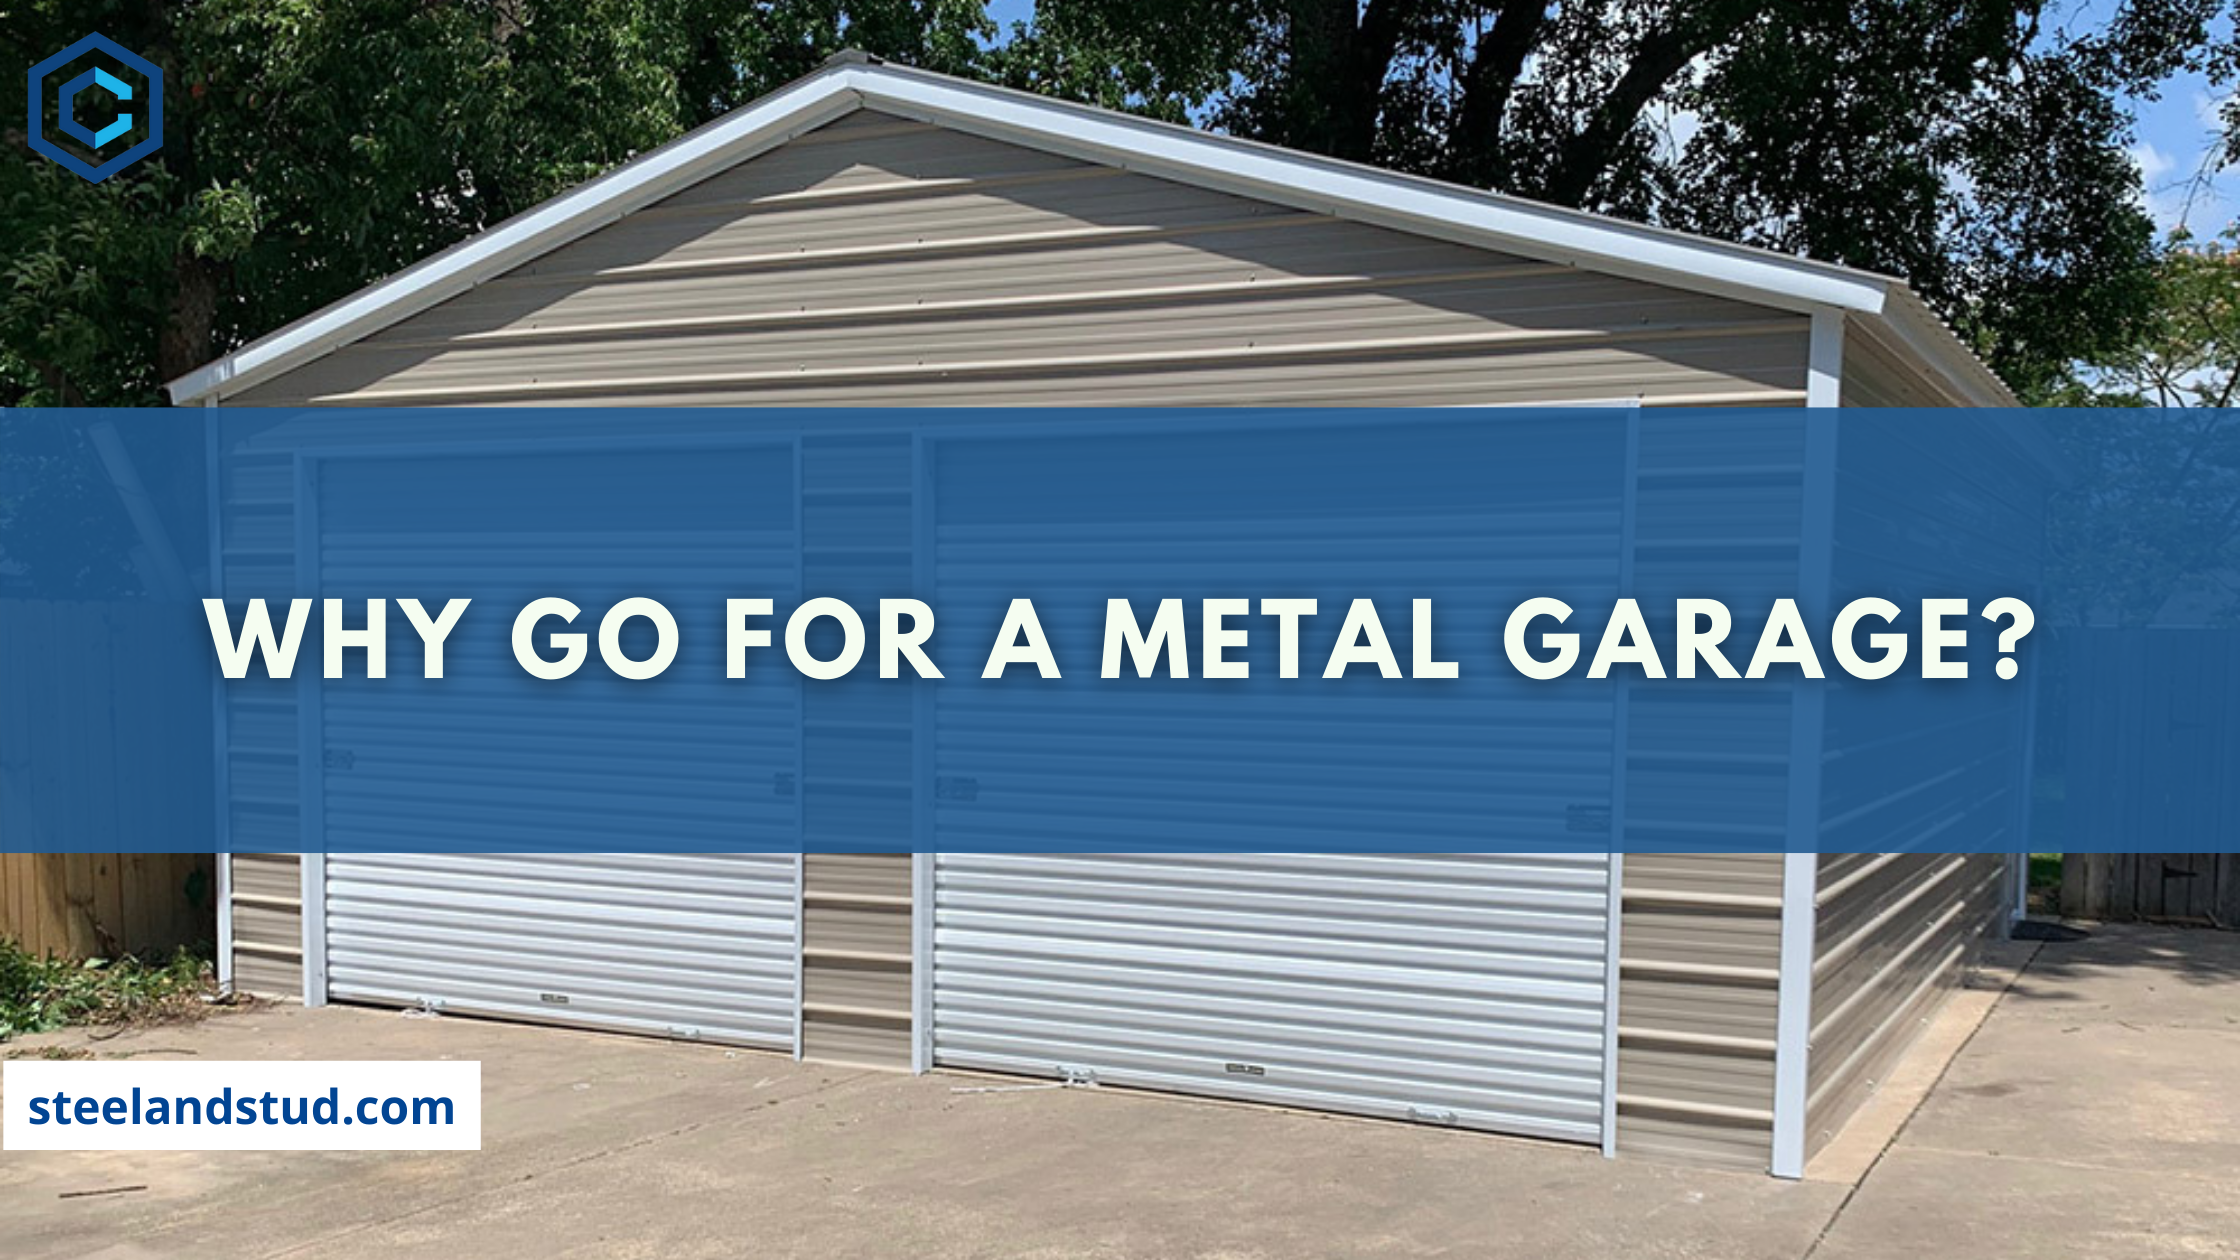 Why do Americans go for Pre-Fab Metal Garage Over Traditional Wood Buildings?